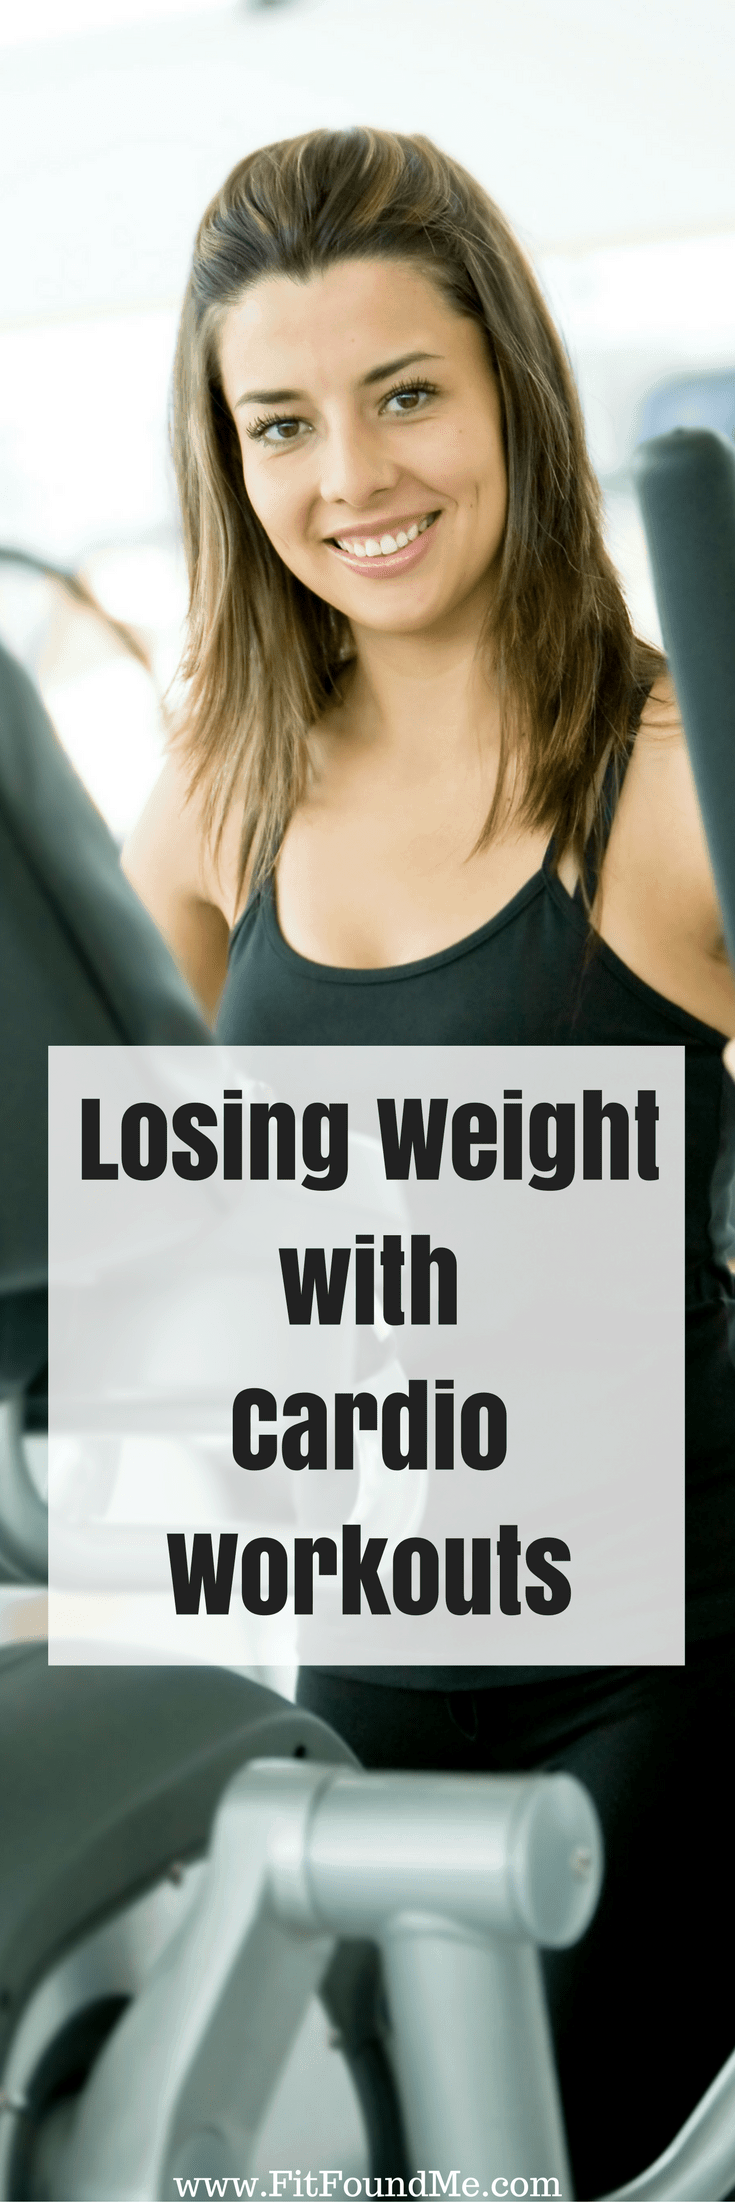 cardio workout for women